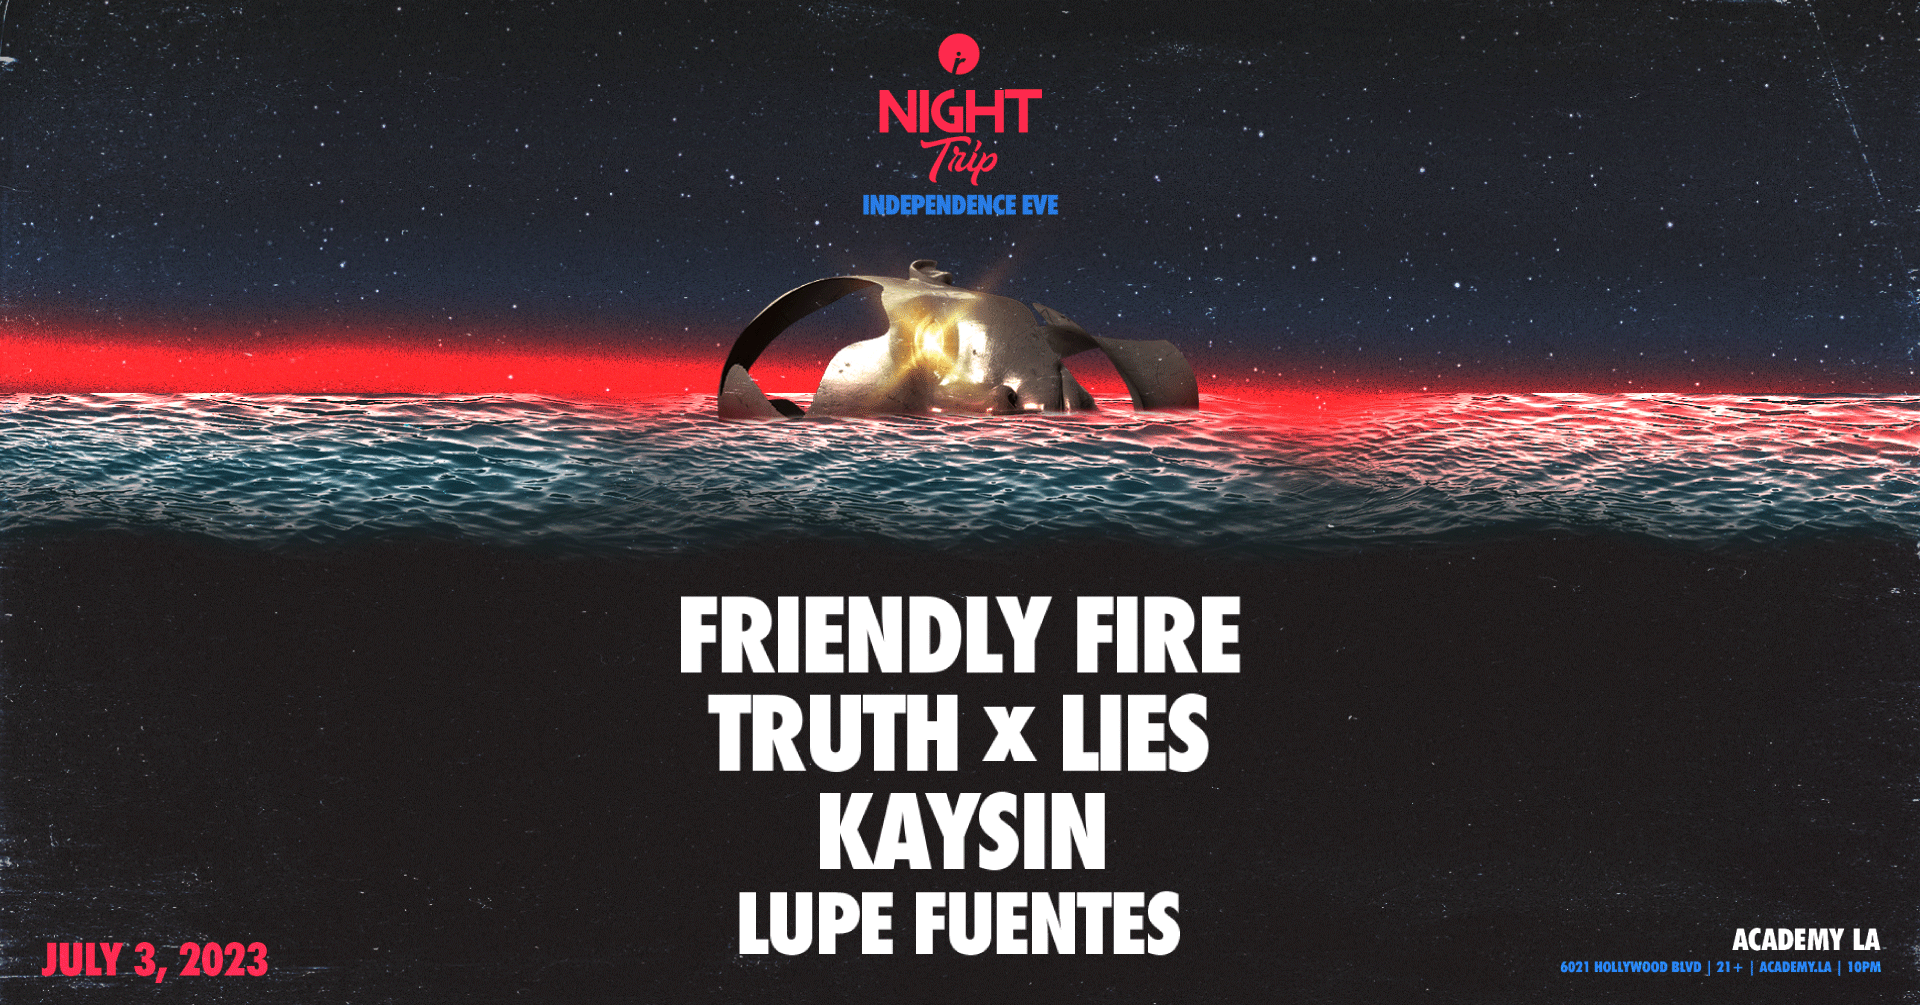 Night Trip: Friendly Fire with Truth x Lies, Kaysin & Lupe Fuentes - Página frontal